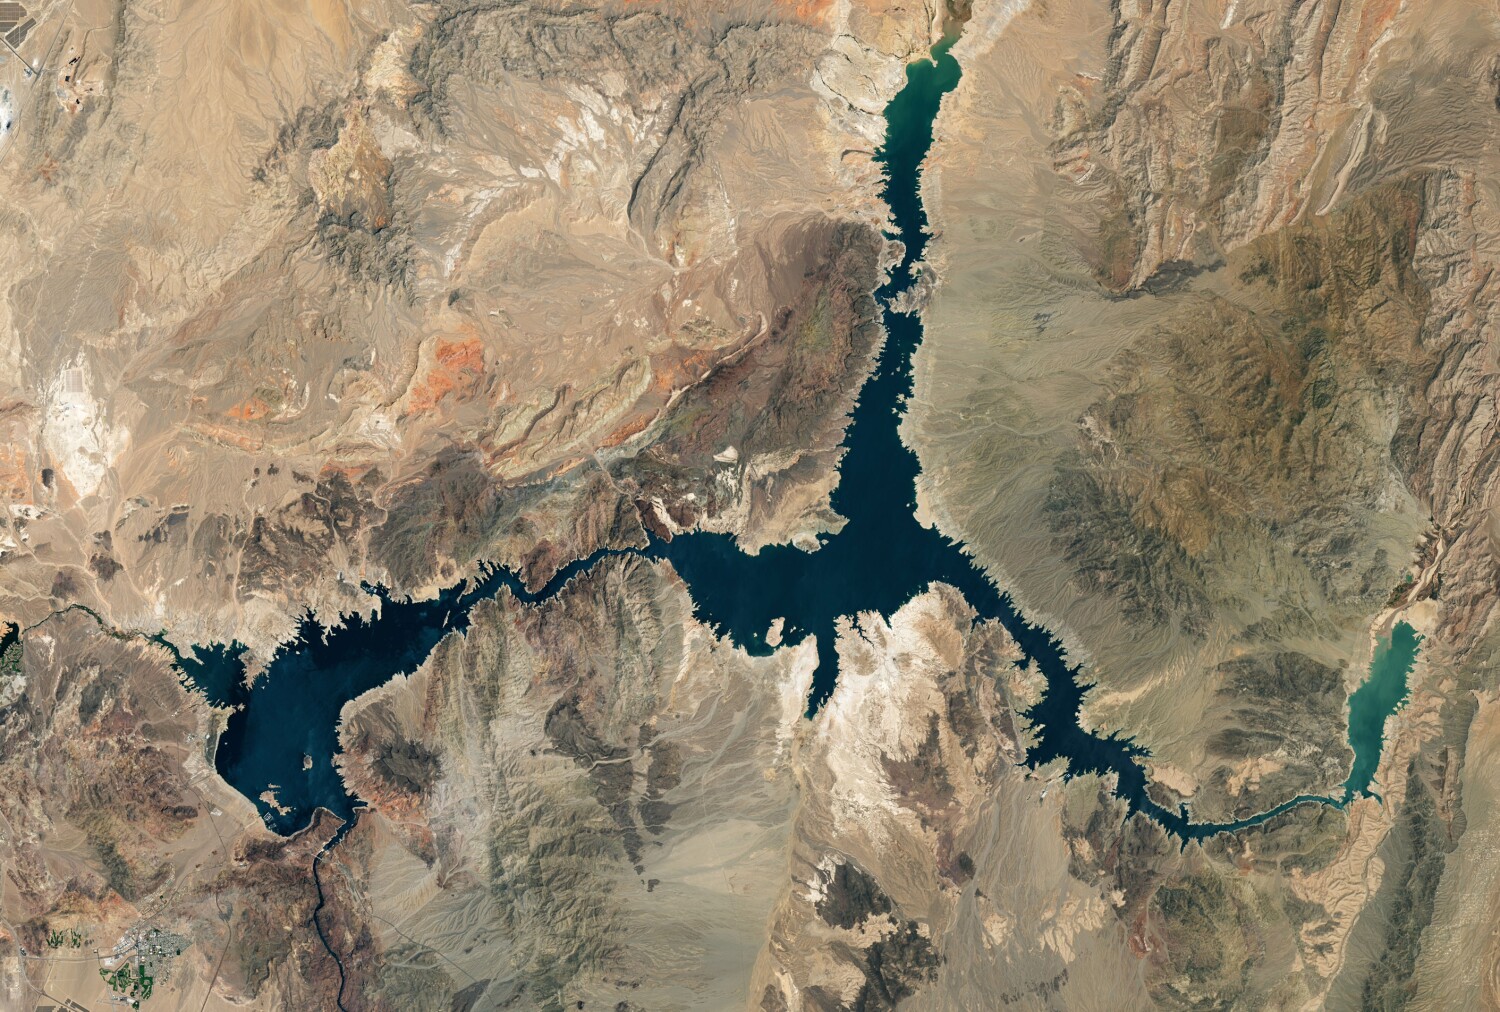 Dramatic NASA photos reveal Lake Mead water levels at lowest point since 1937